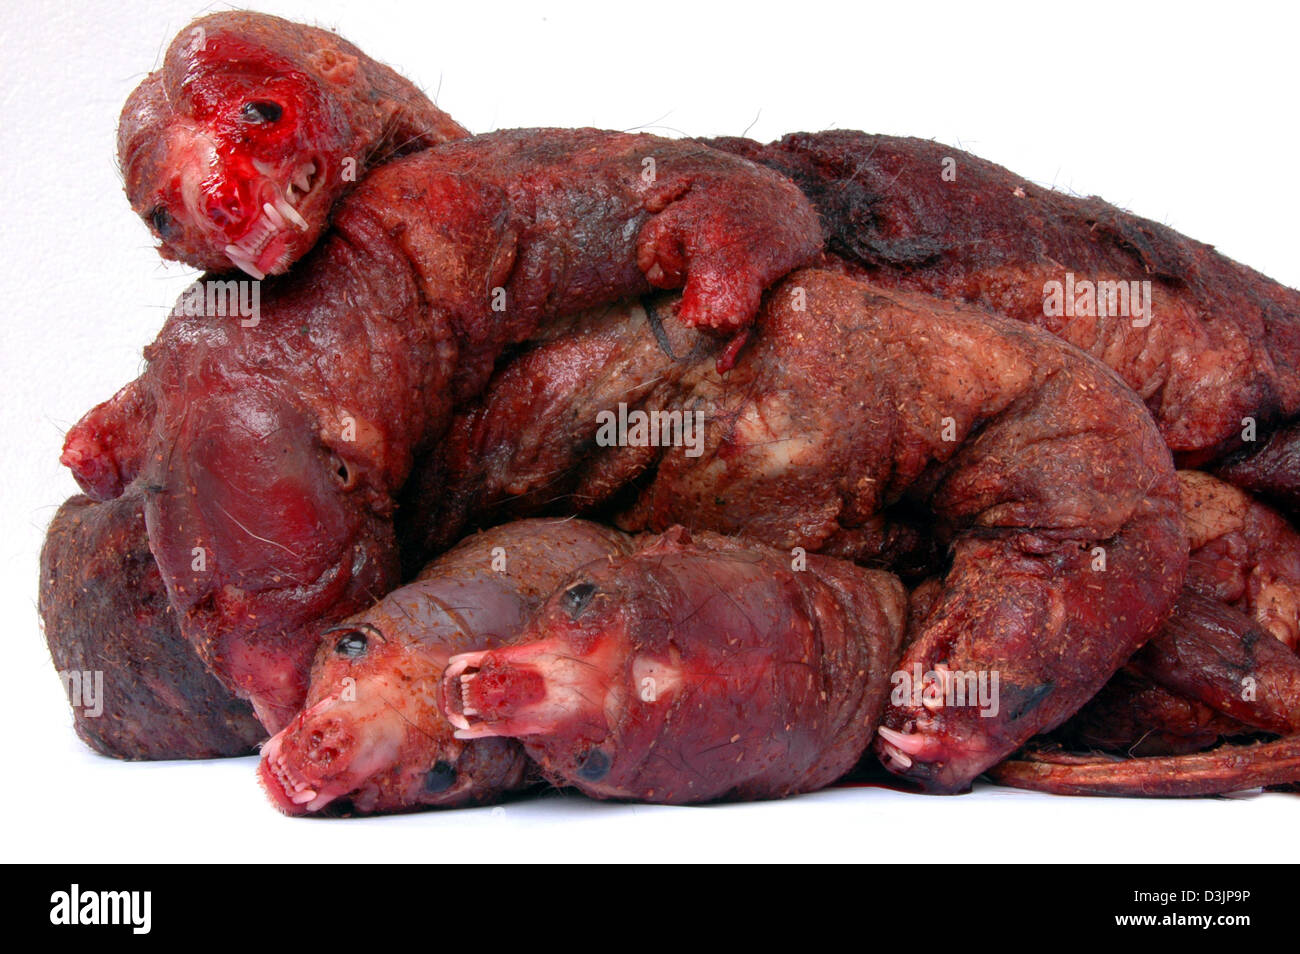 dpa-farm-minks-pictured-after-they-were-skinned-in-the-netherlands-D3JP9P.jpg